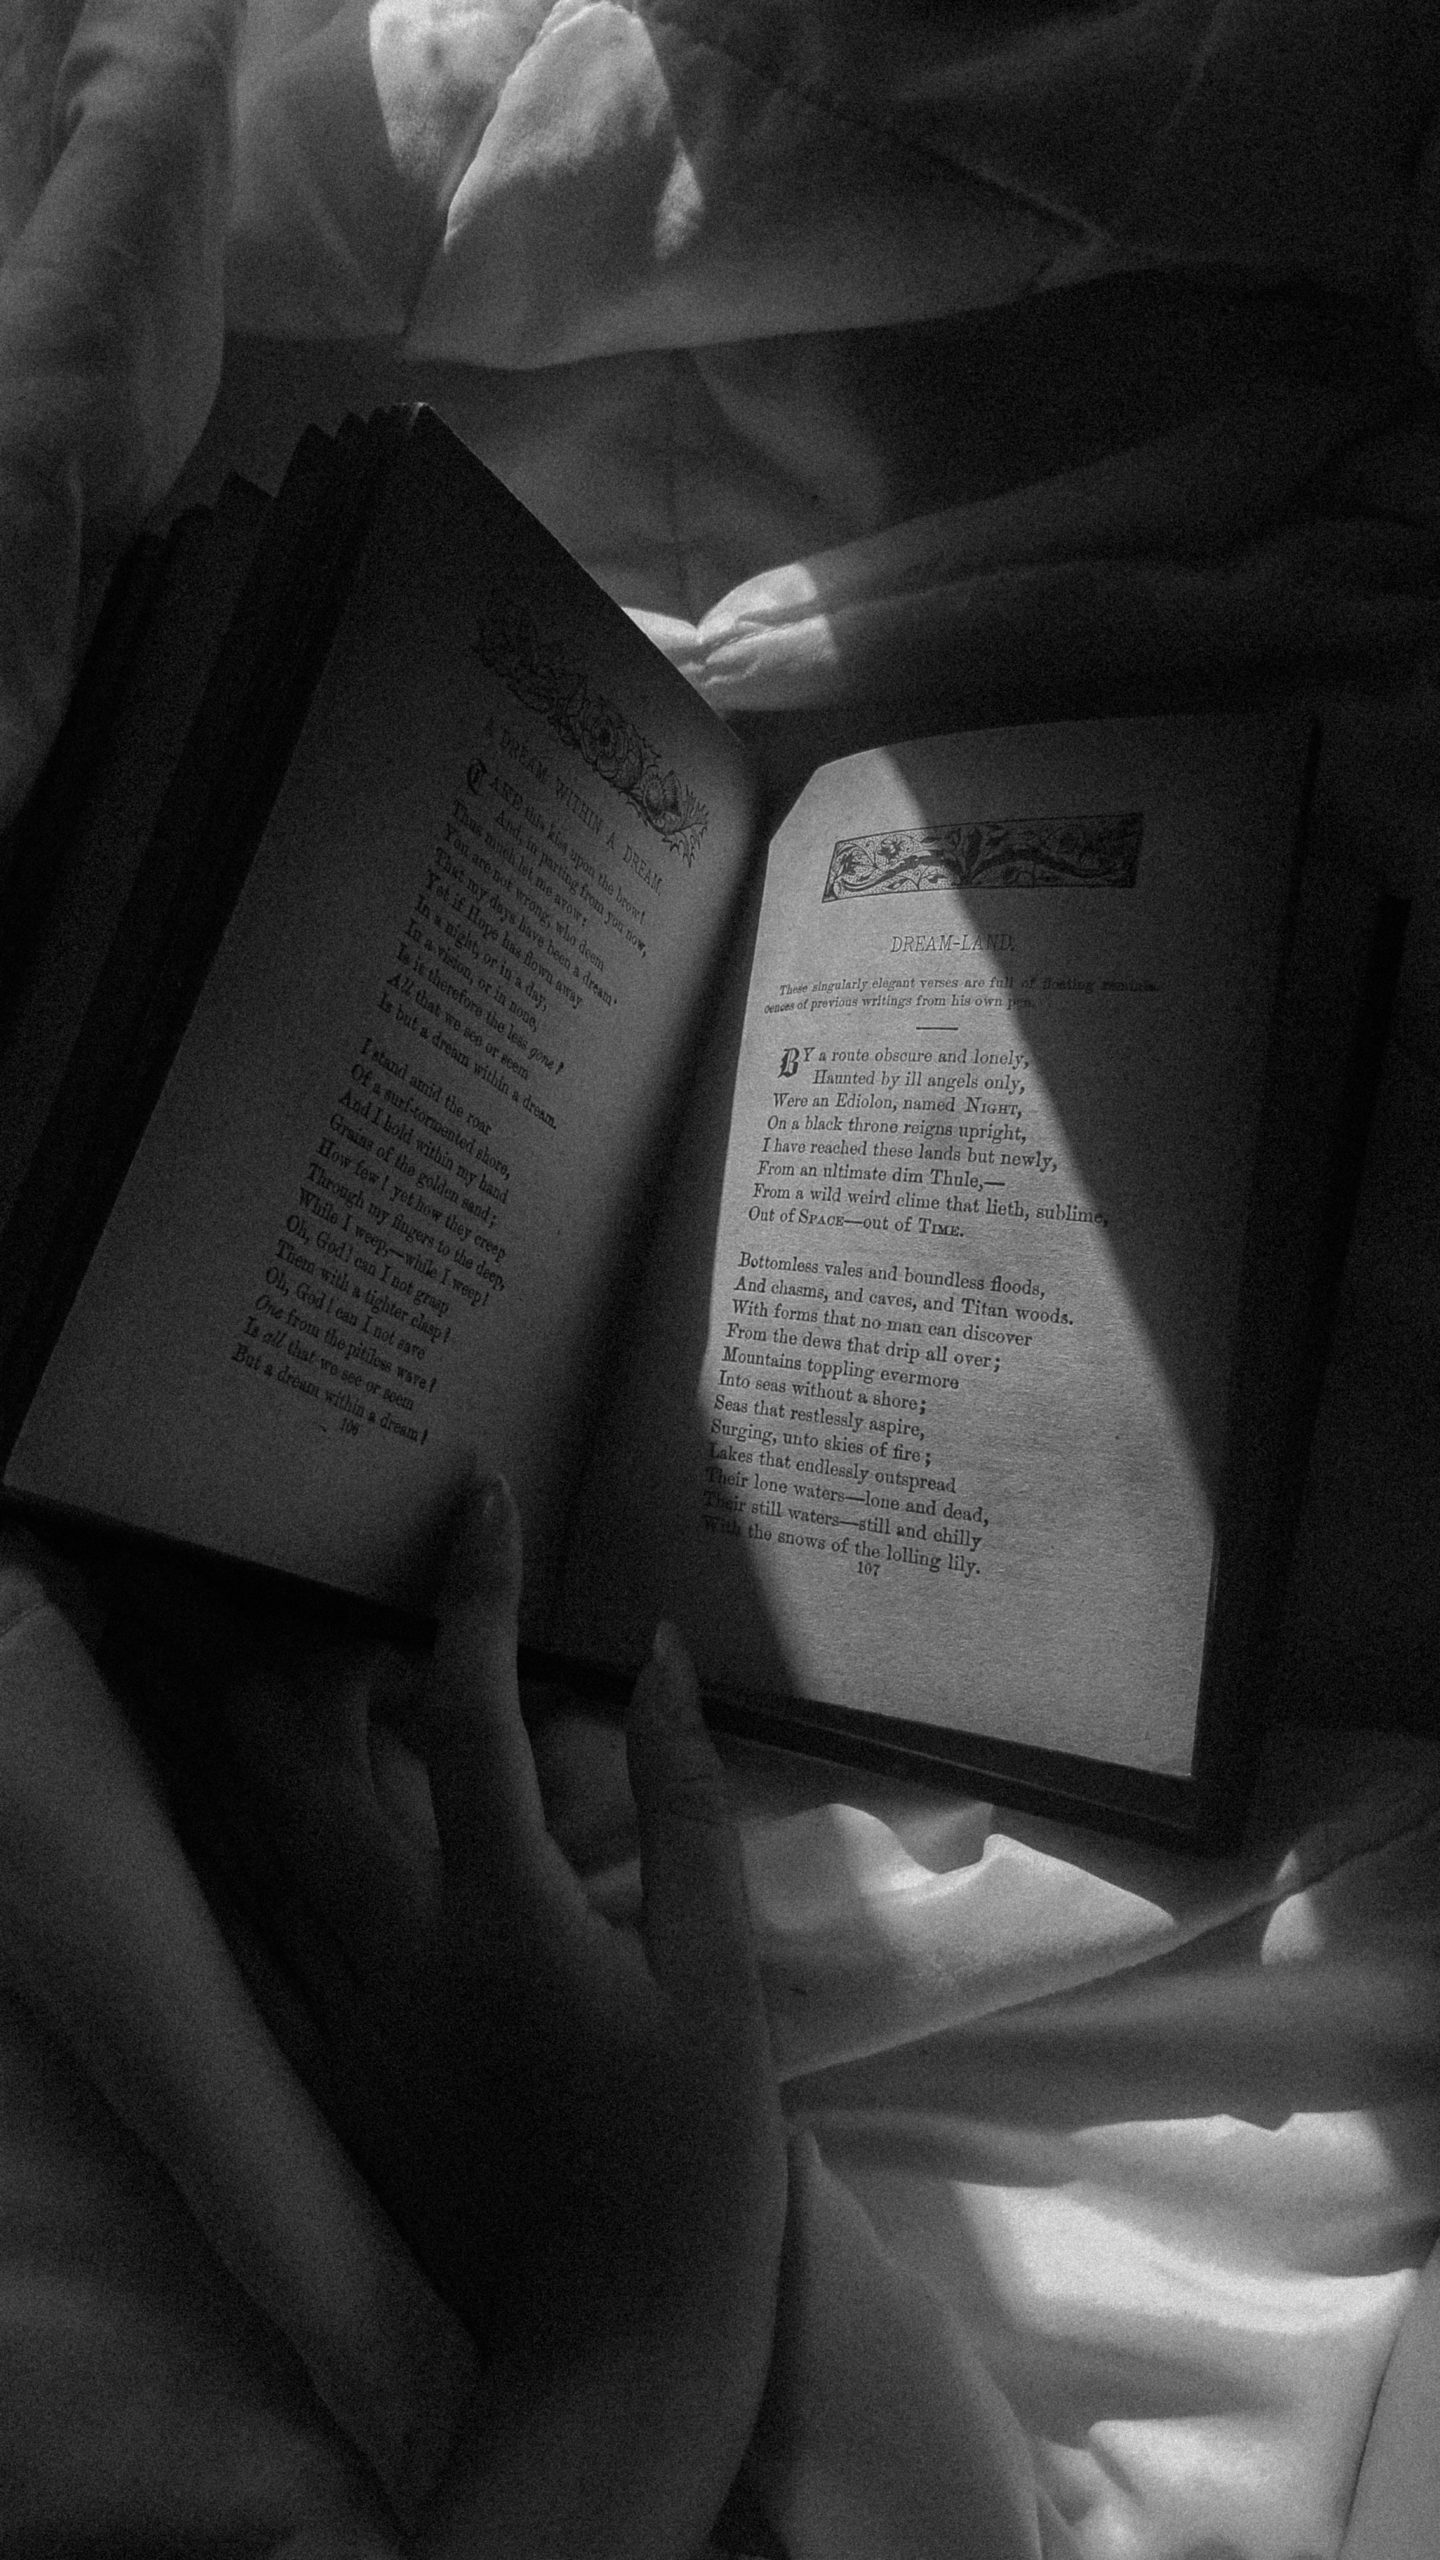 Woman's hand holding a book on her bed.